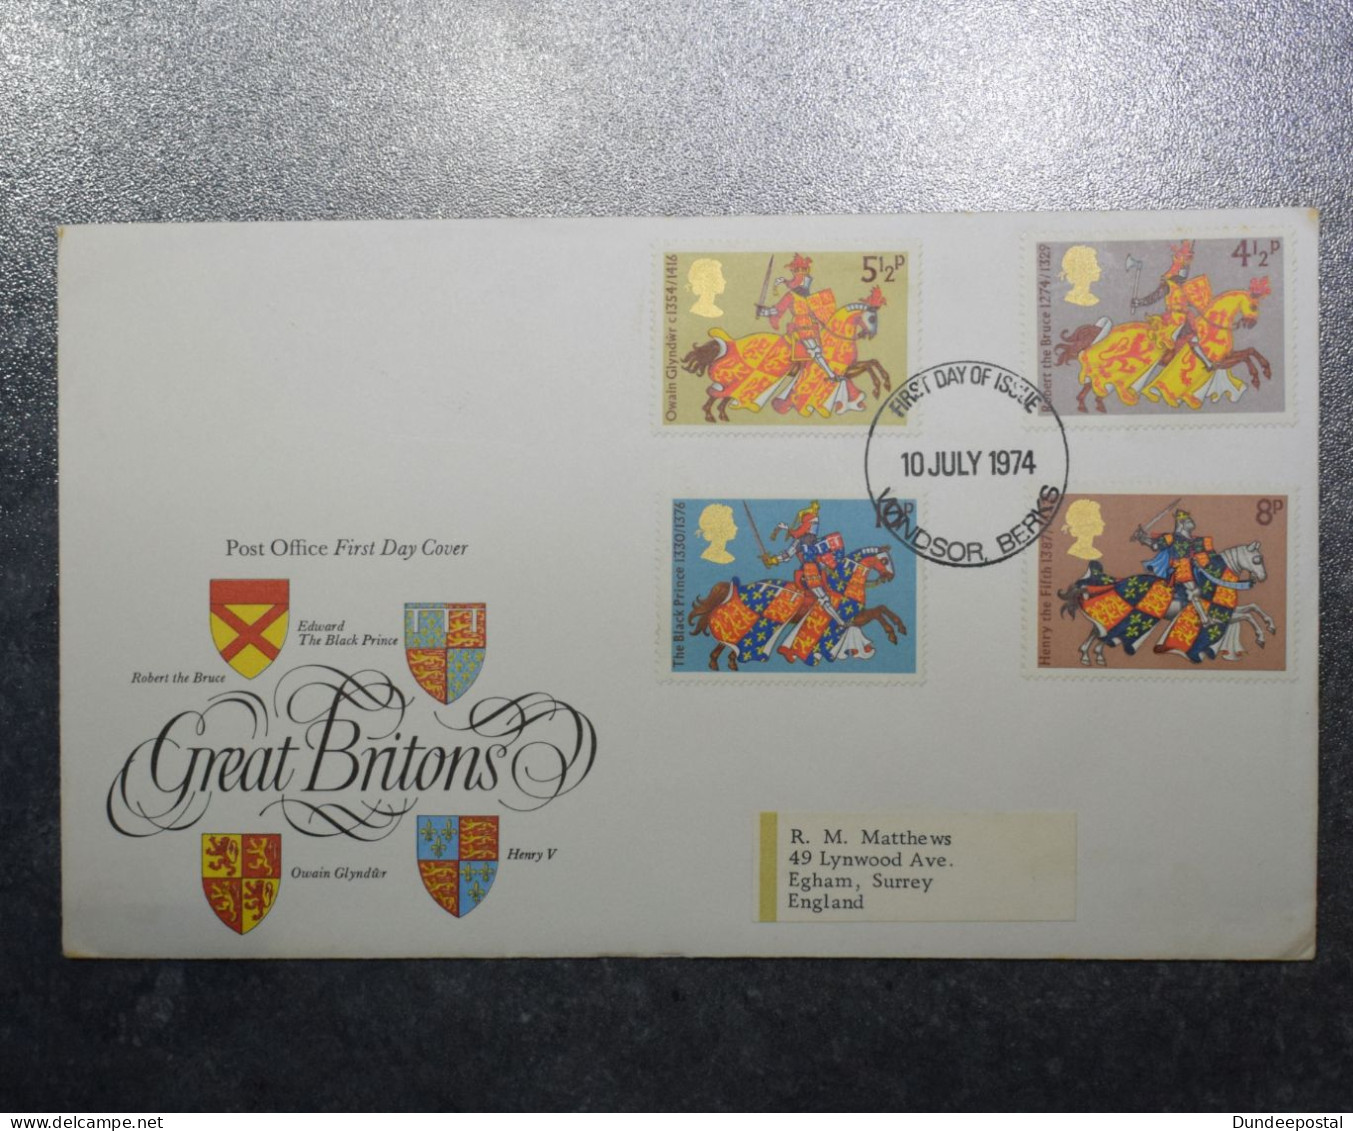 GB STAMPS  FDC Great Britons  1974   (2)   ~~L@@K~~ - 1971-1980 Decimal Issues